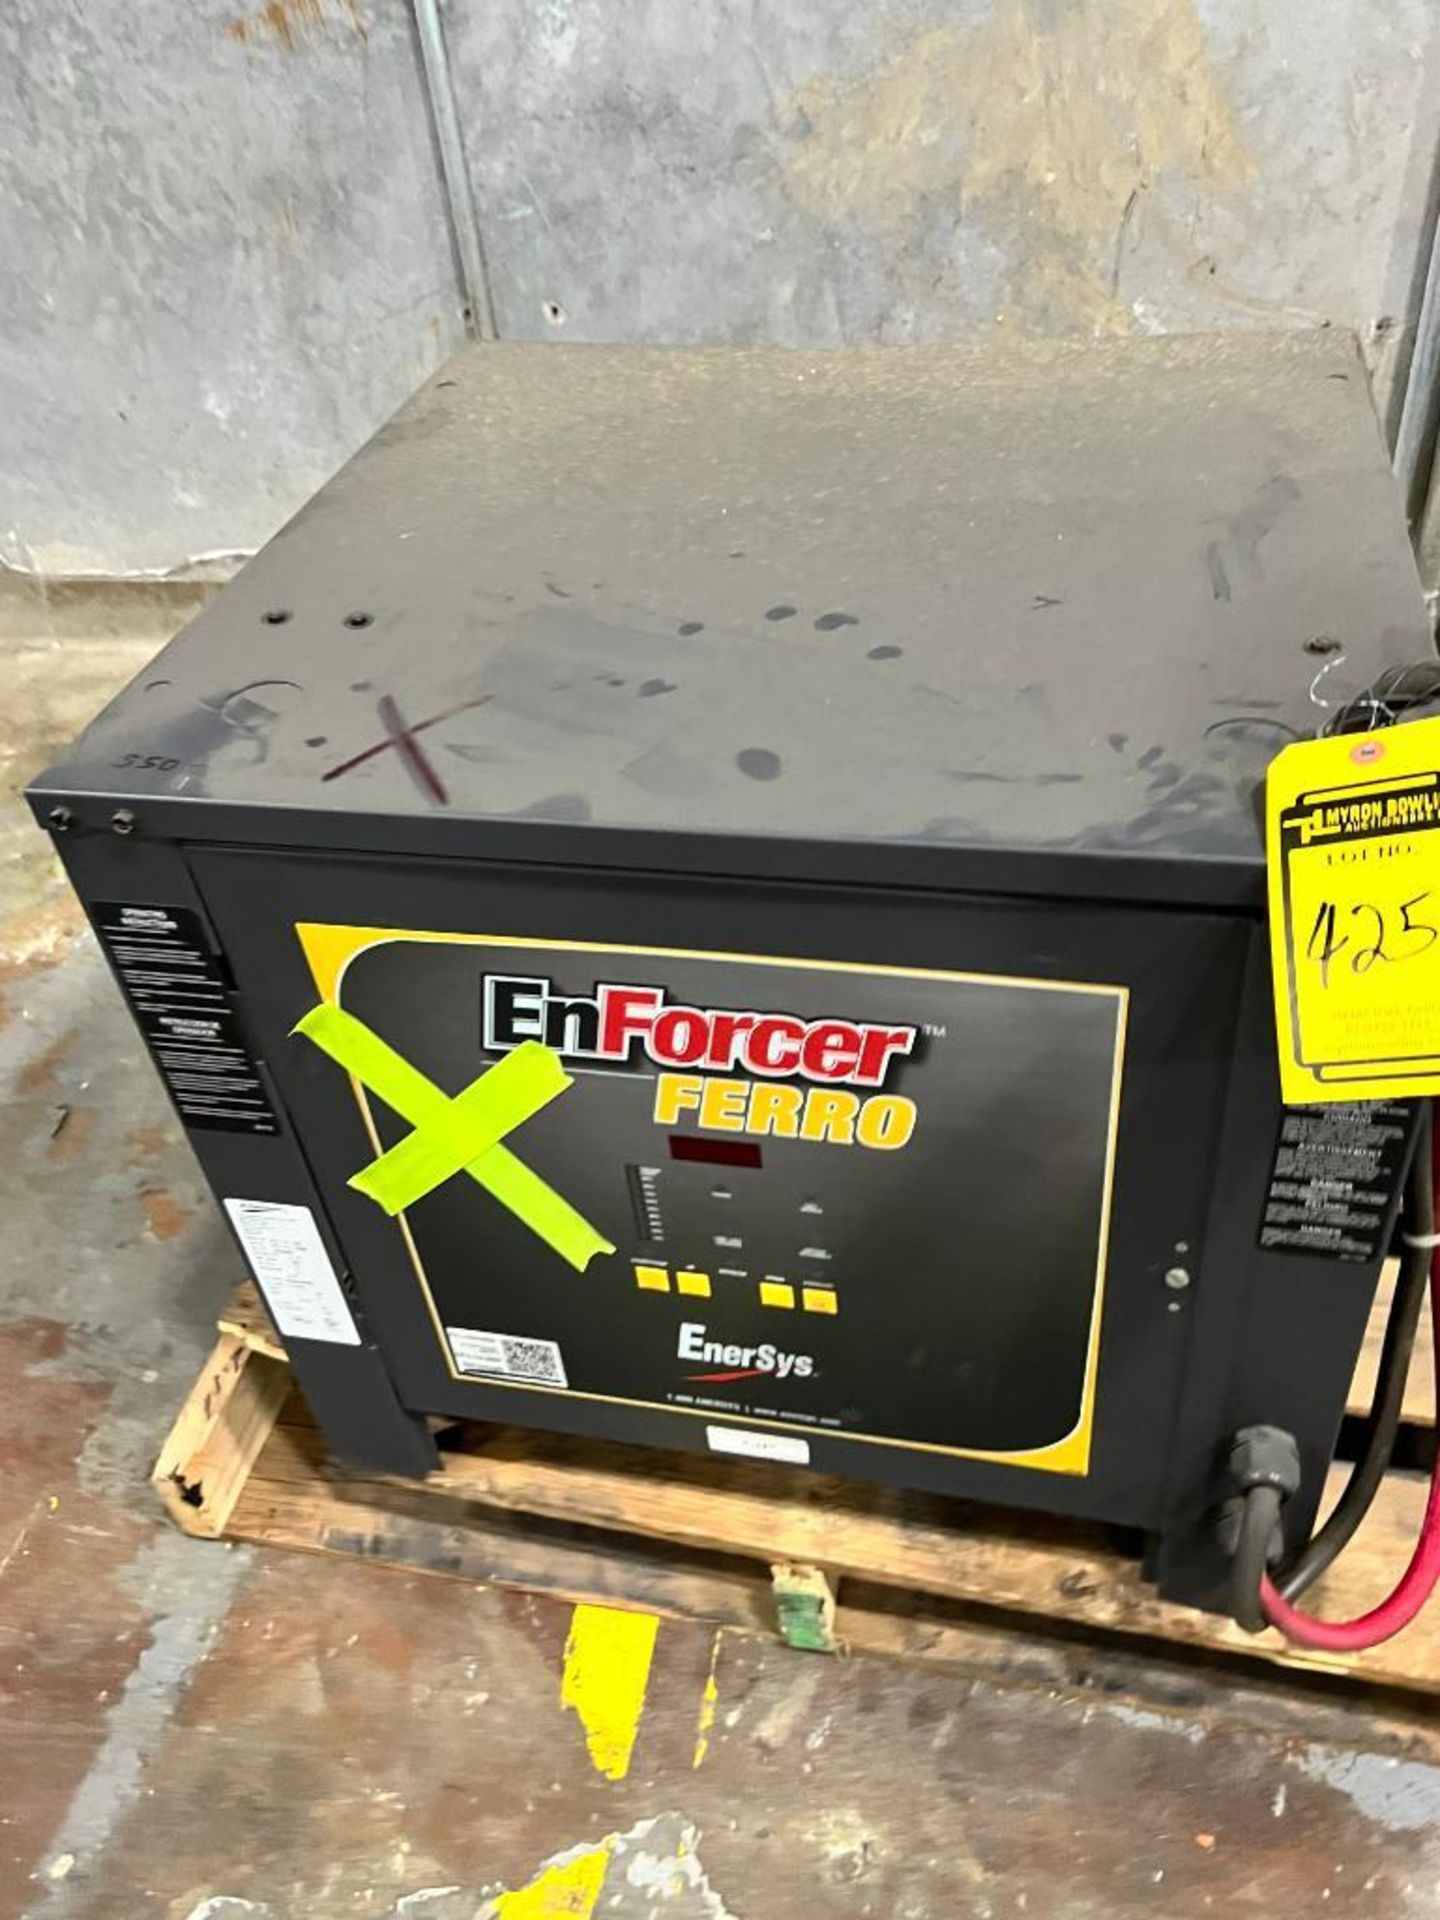 Enersys Enforcer Ferro 24 Battery Charger, Model EF3-12-865, S/N GE33396 ($25 Loading fee will be ad